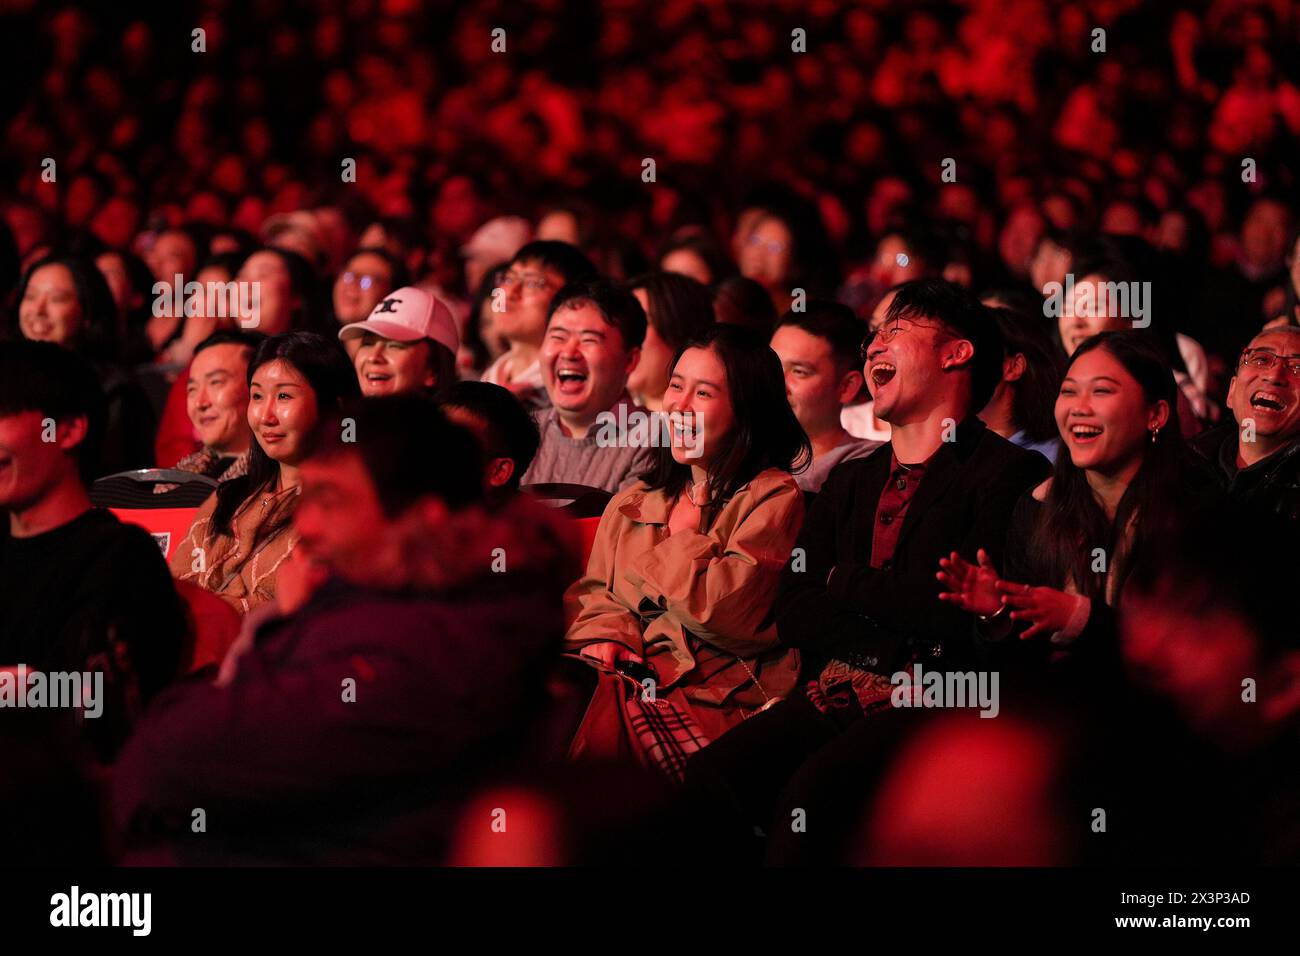 (240428) -- LONDON, April 28, 2024 (Xinhua) -- Audience watch Xiangsheng, or crosstalk comedy in London, Britain, April 27, 2024. Thunderous laughter and applause almost blew off the roof of an auditorium in London's ExCeL Exhibition Centre on Saturday night, when a punchline by Guo Degang, a popular Chinese traditional crosstalk comedian, landed with an audience of thousands. Along with Guo and his partner Yu Qian, a handful of comedians from the De Yun She Performance Group performed Xiangsheng, or crosstalk comedy, with both jokes about life anecdotes and traditional crosstalk episodes. Stock Photo